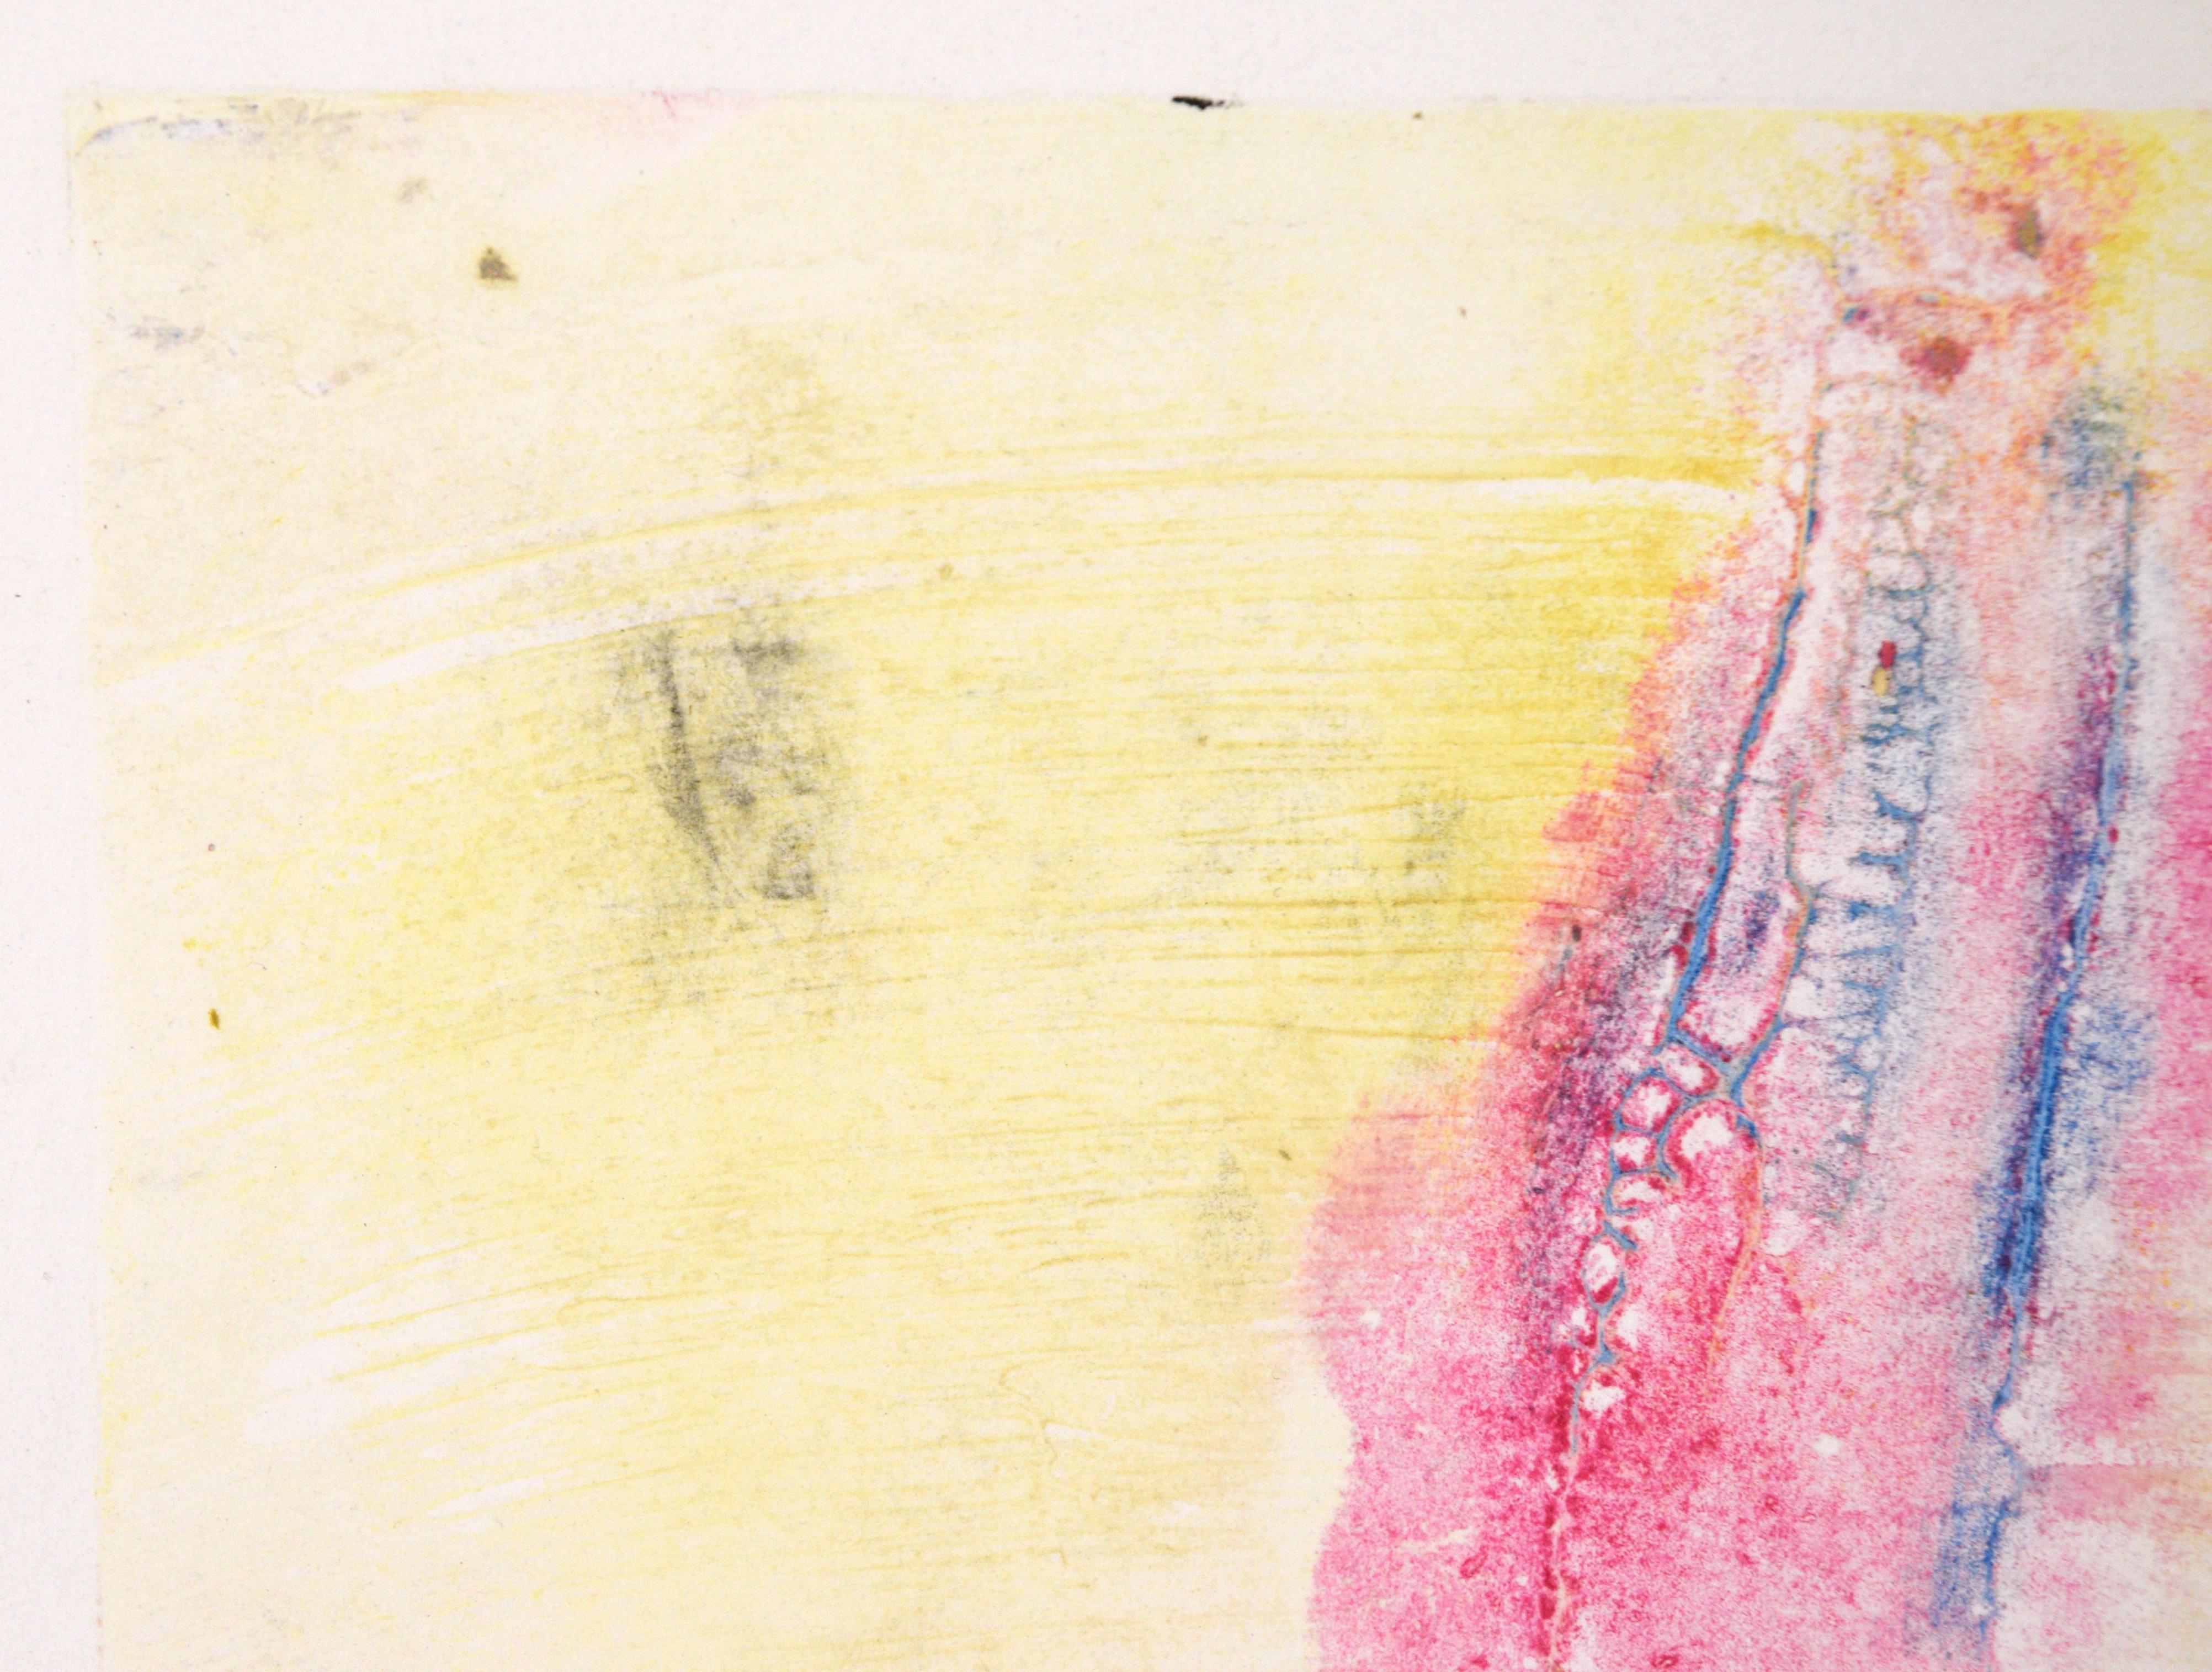 Blue and Pink on Yellow - Textured Transfer Monotype in Oil on Paper - Abstract Expressionist Print by Heather Speck